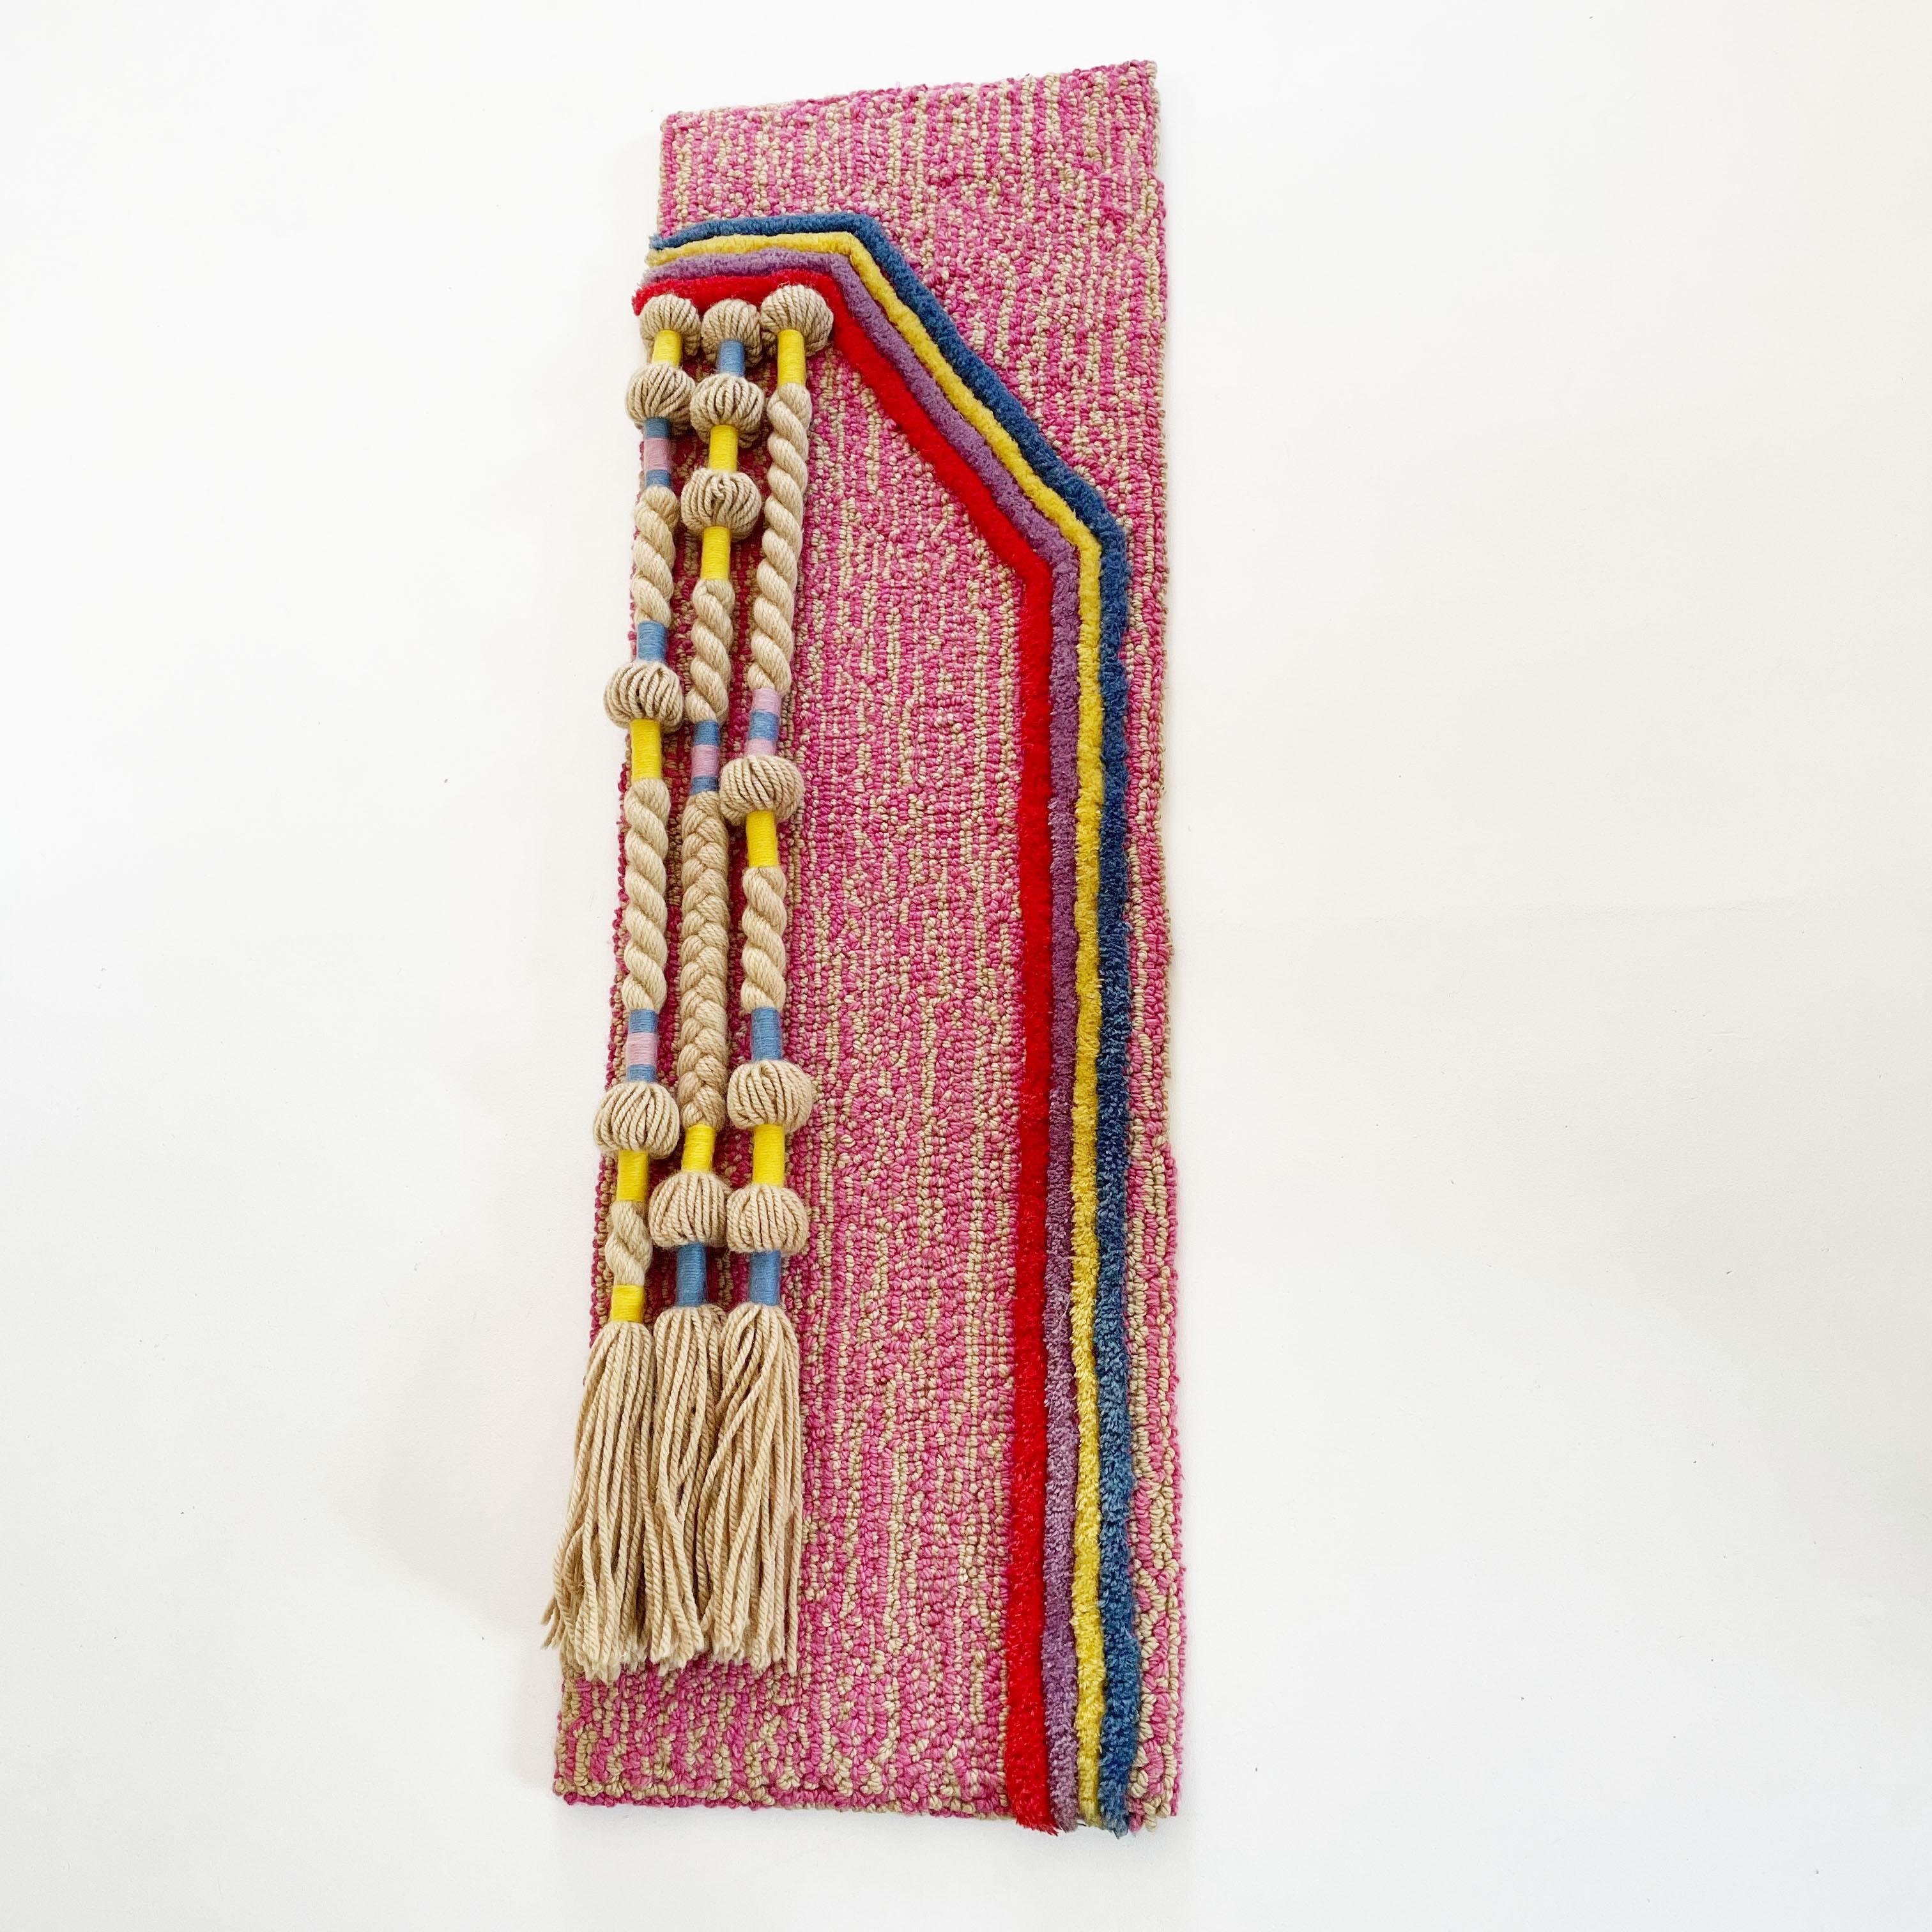 Article:

Wall rug


Decade:

1970s


Origin:

Germany


Producer:

Schloss Hackhausen, Germany


Design:

Ewald Kröner


This rug is a great example of 1970s pop art interior. Made in high quality handmade macrame weaving